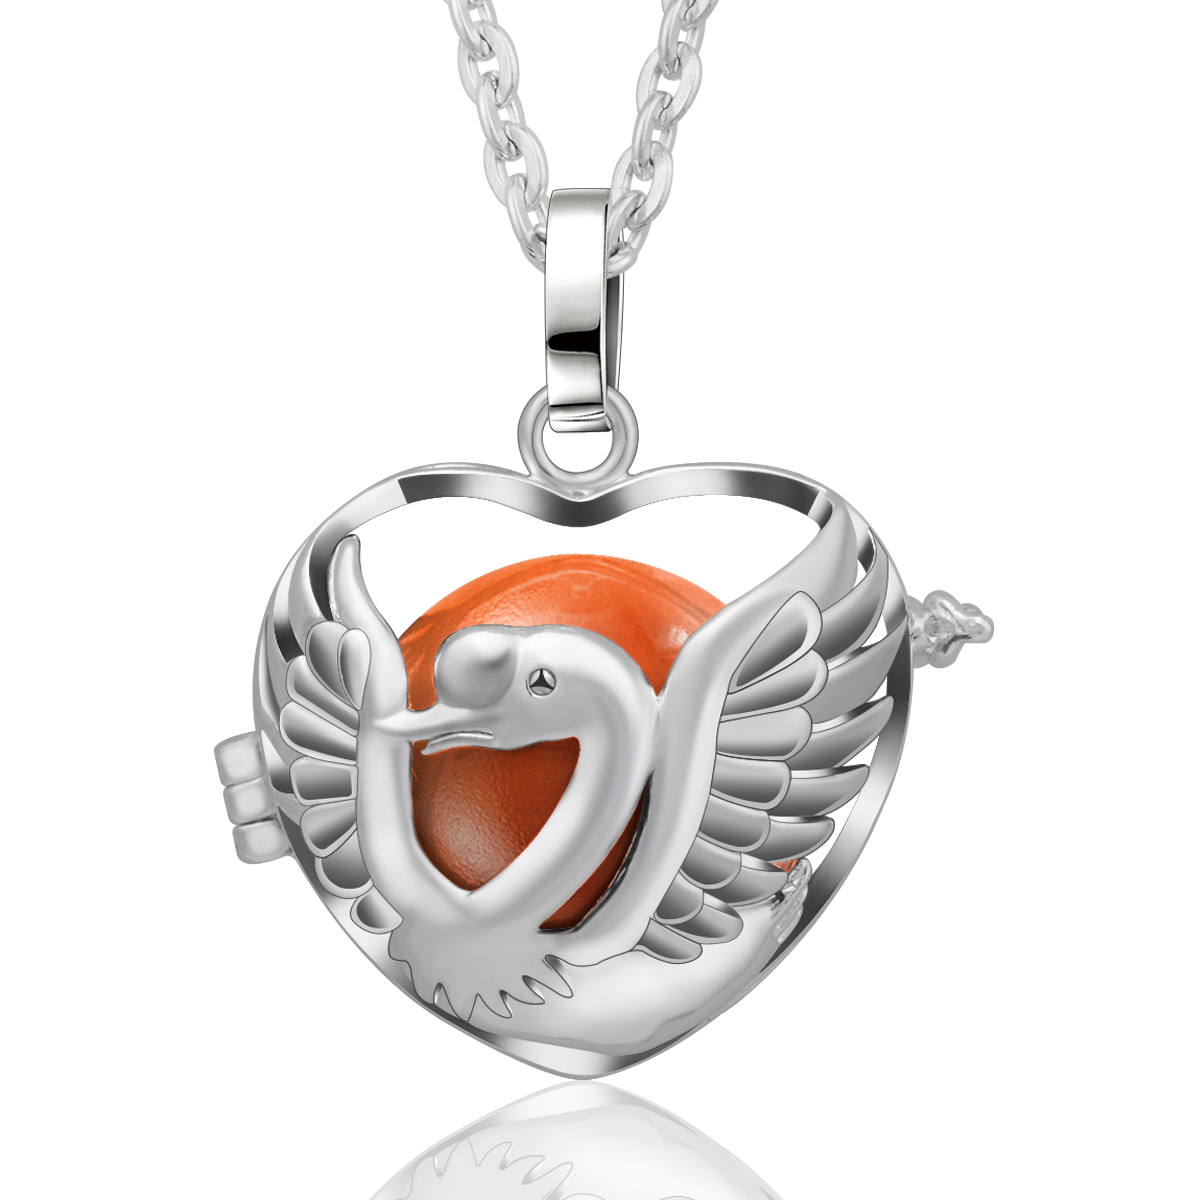 Merryshine Jewelry Pregnancy Ball Harmony Bola Pendent Chime Ball Baby Bell Angel Caller Necklace llamadores de angeles